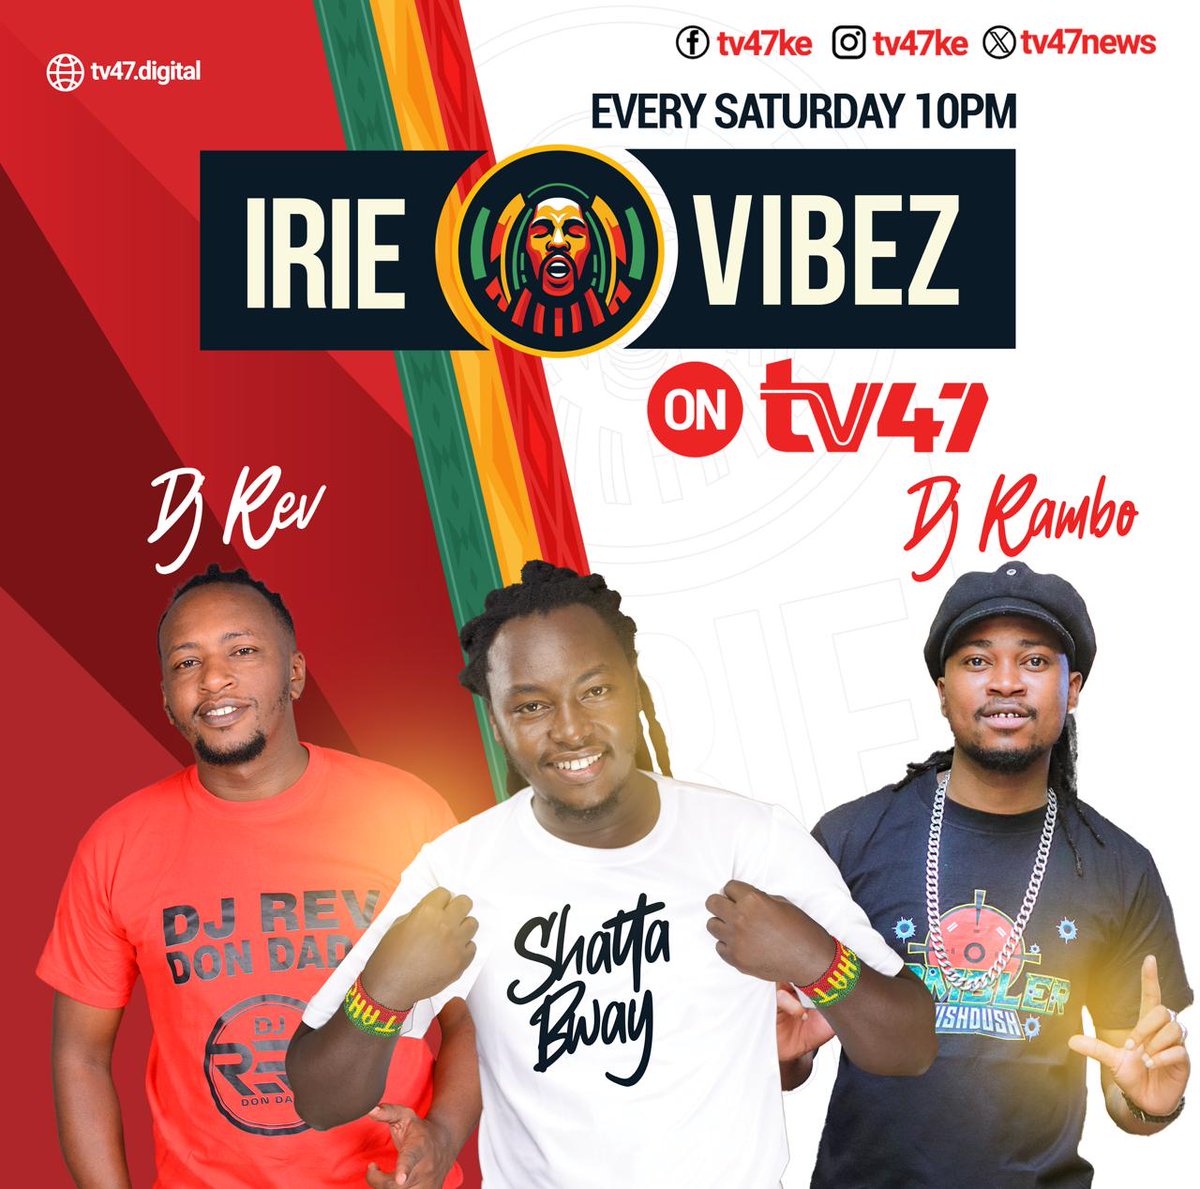 Ready for a getaway without leaving your couch? Join us on 'TV47 Irie Vibes' for a journey to paradise through the power of reggae music. Let the melodies whisk you away to a place of relaxation and good vibes. Don't miss out! #IrieVibezTV47